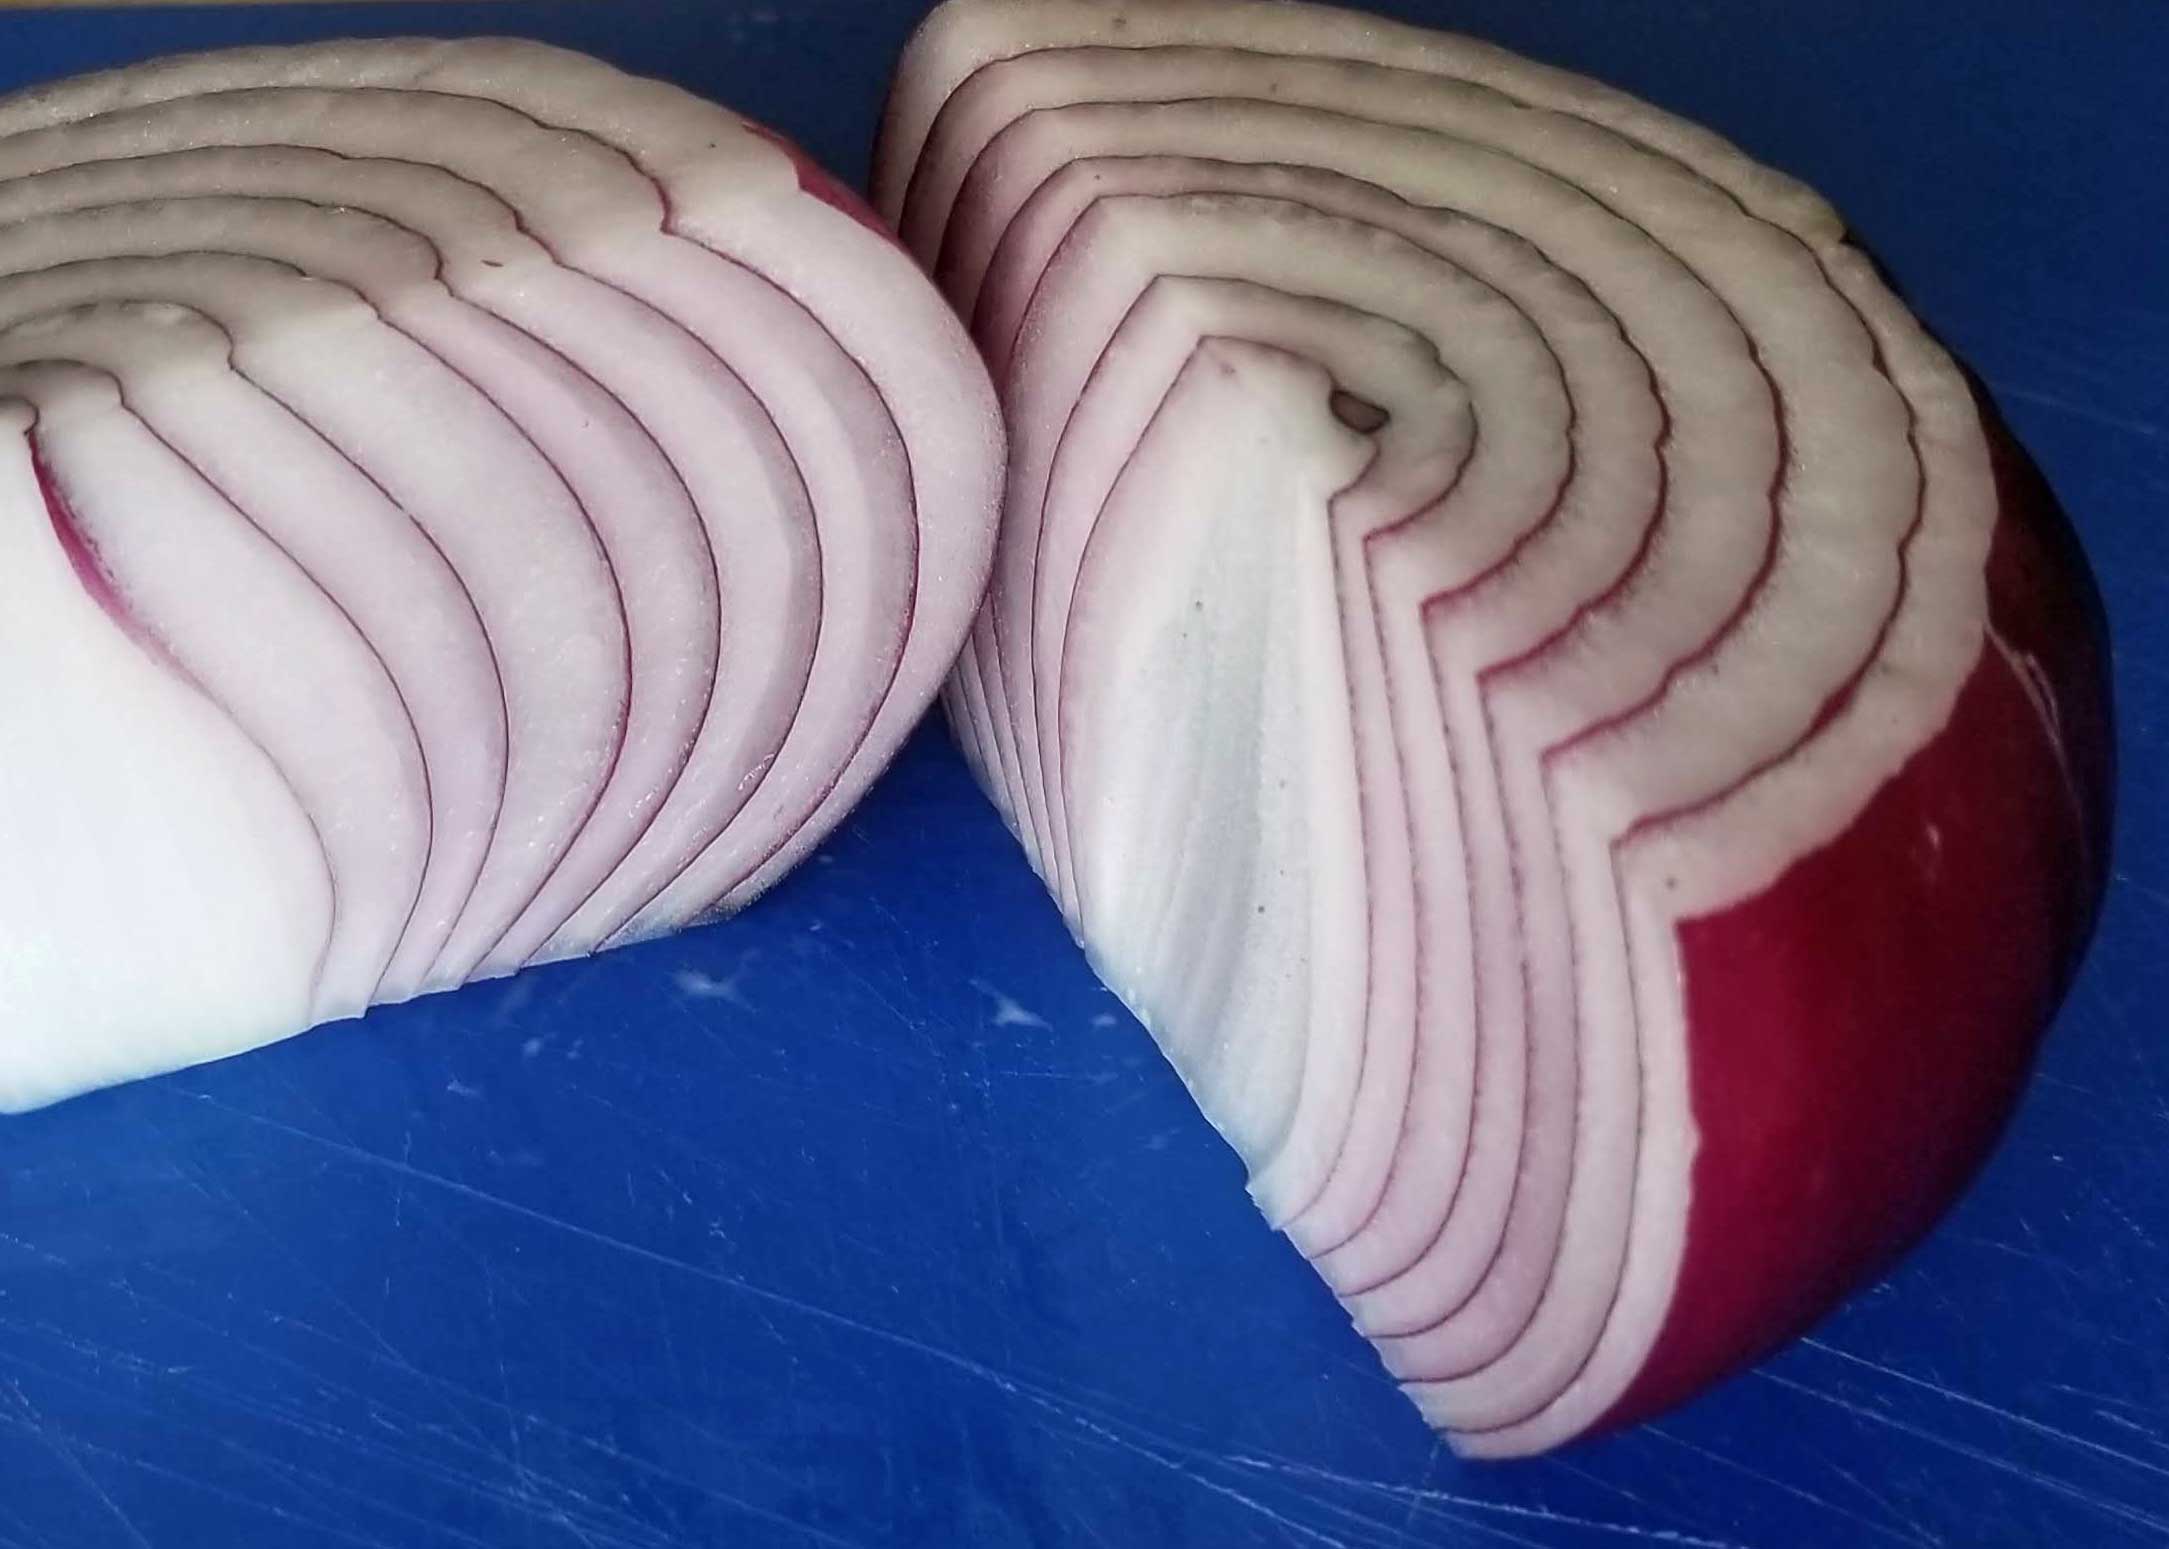 red-onion